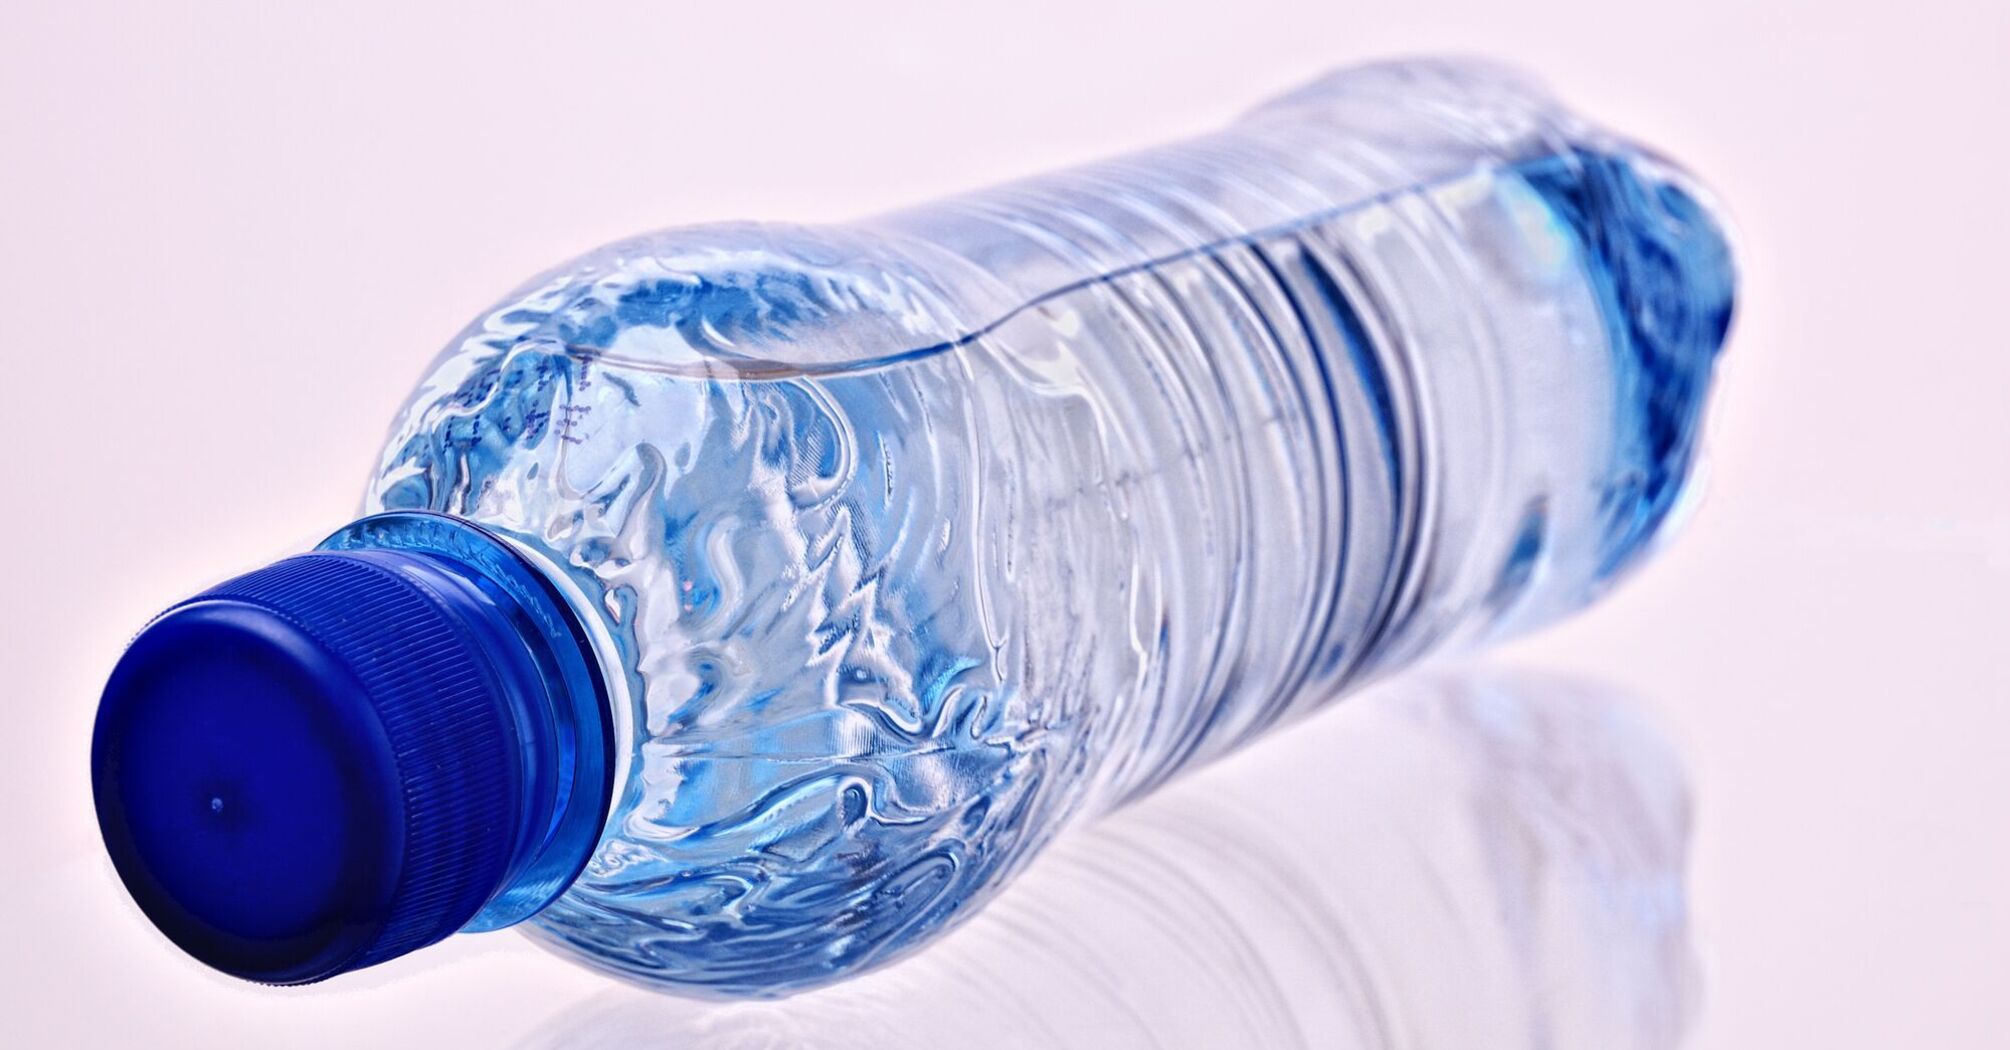 A plastic water bottle with a blue cap